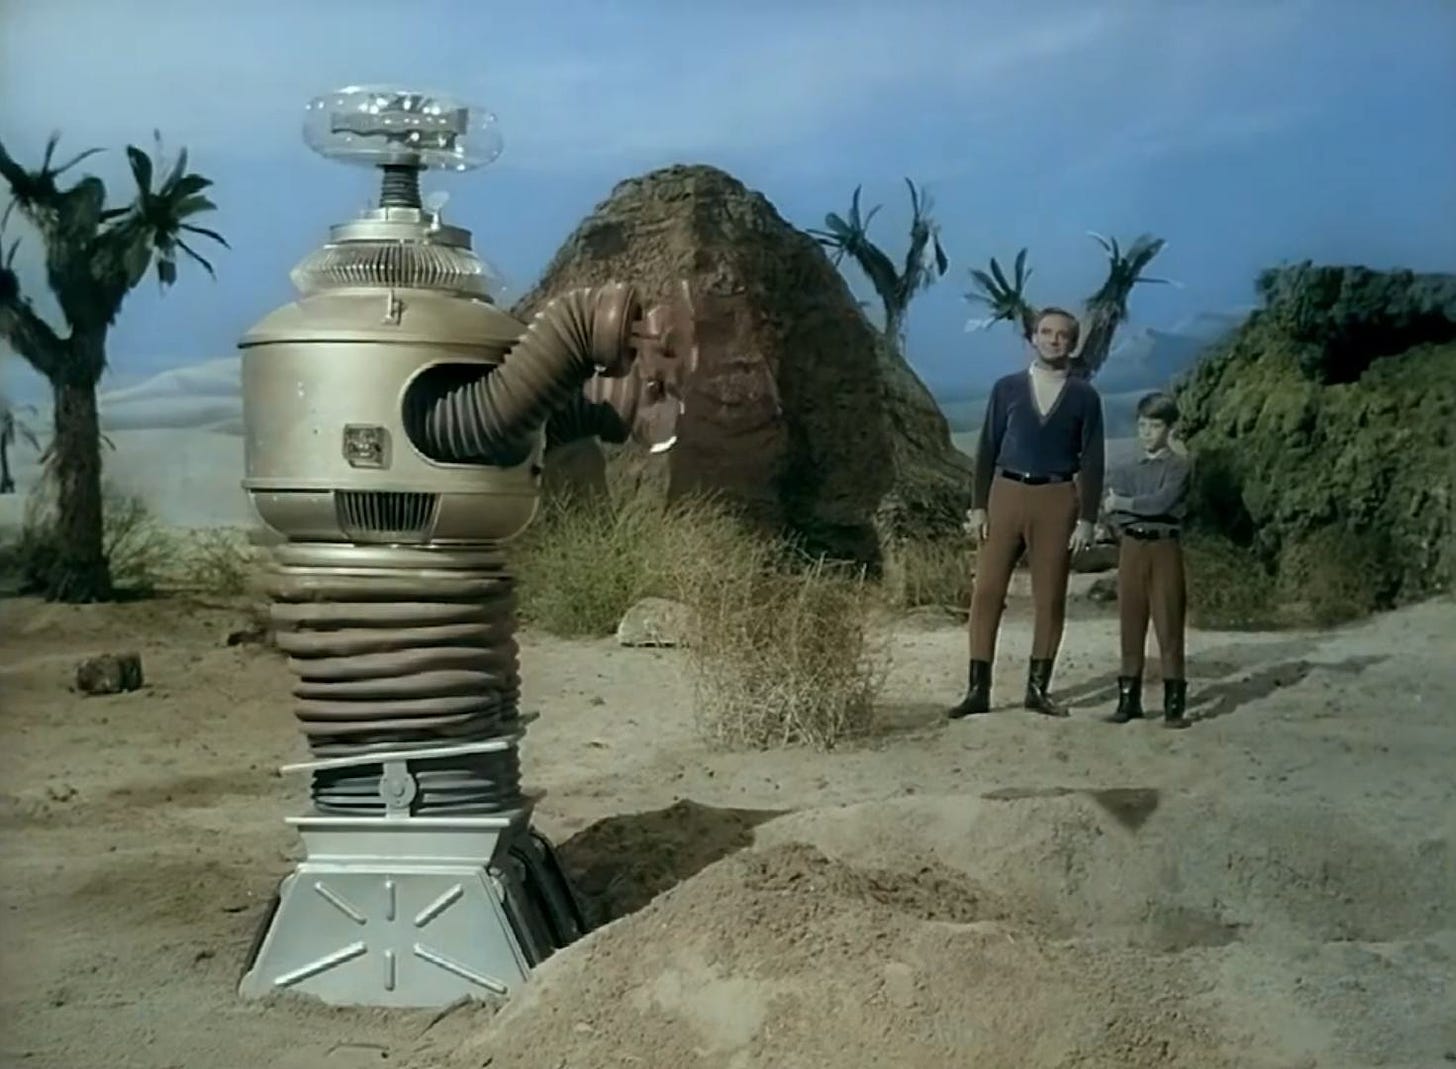 The robot with Dr. Smith and Will in a Season 1 episode of Lost in space.